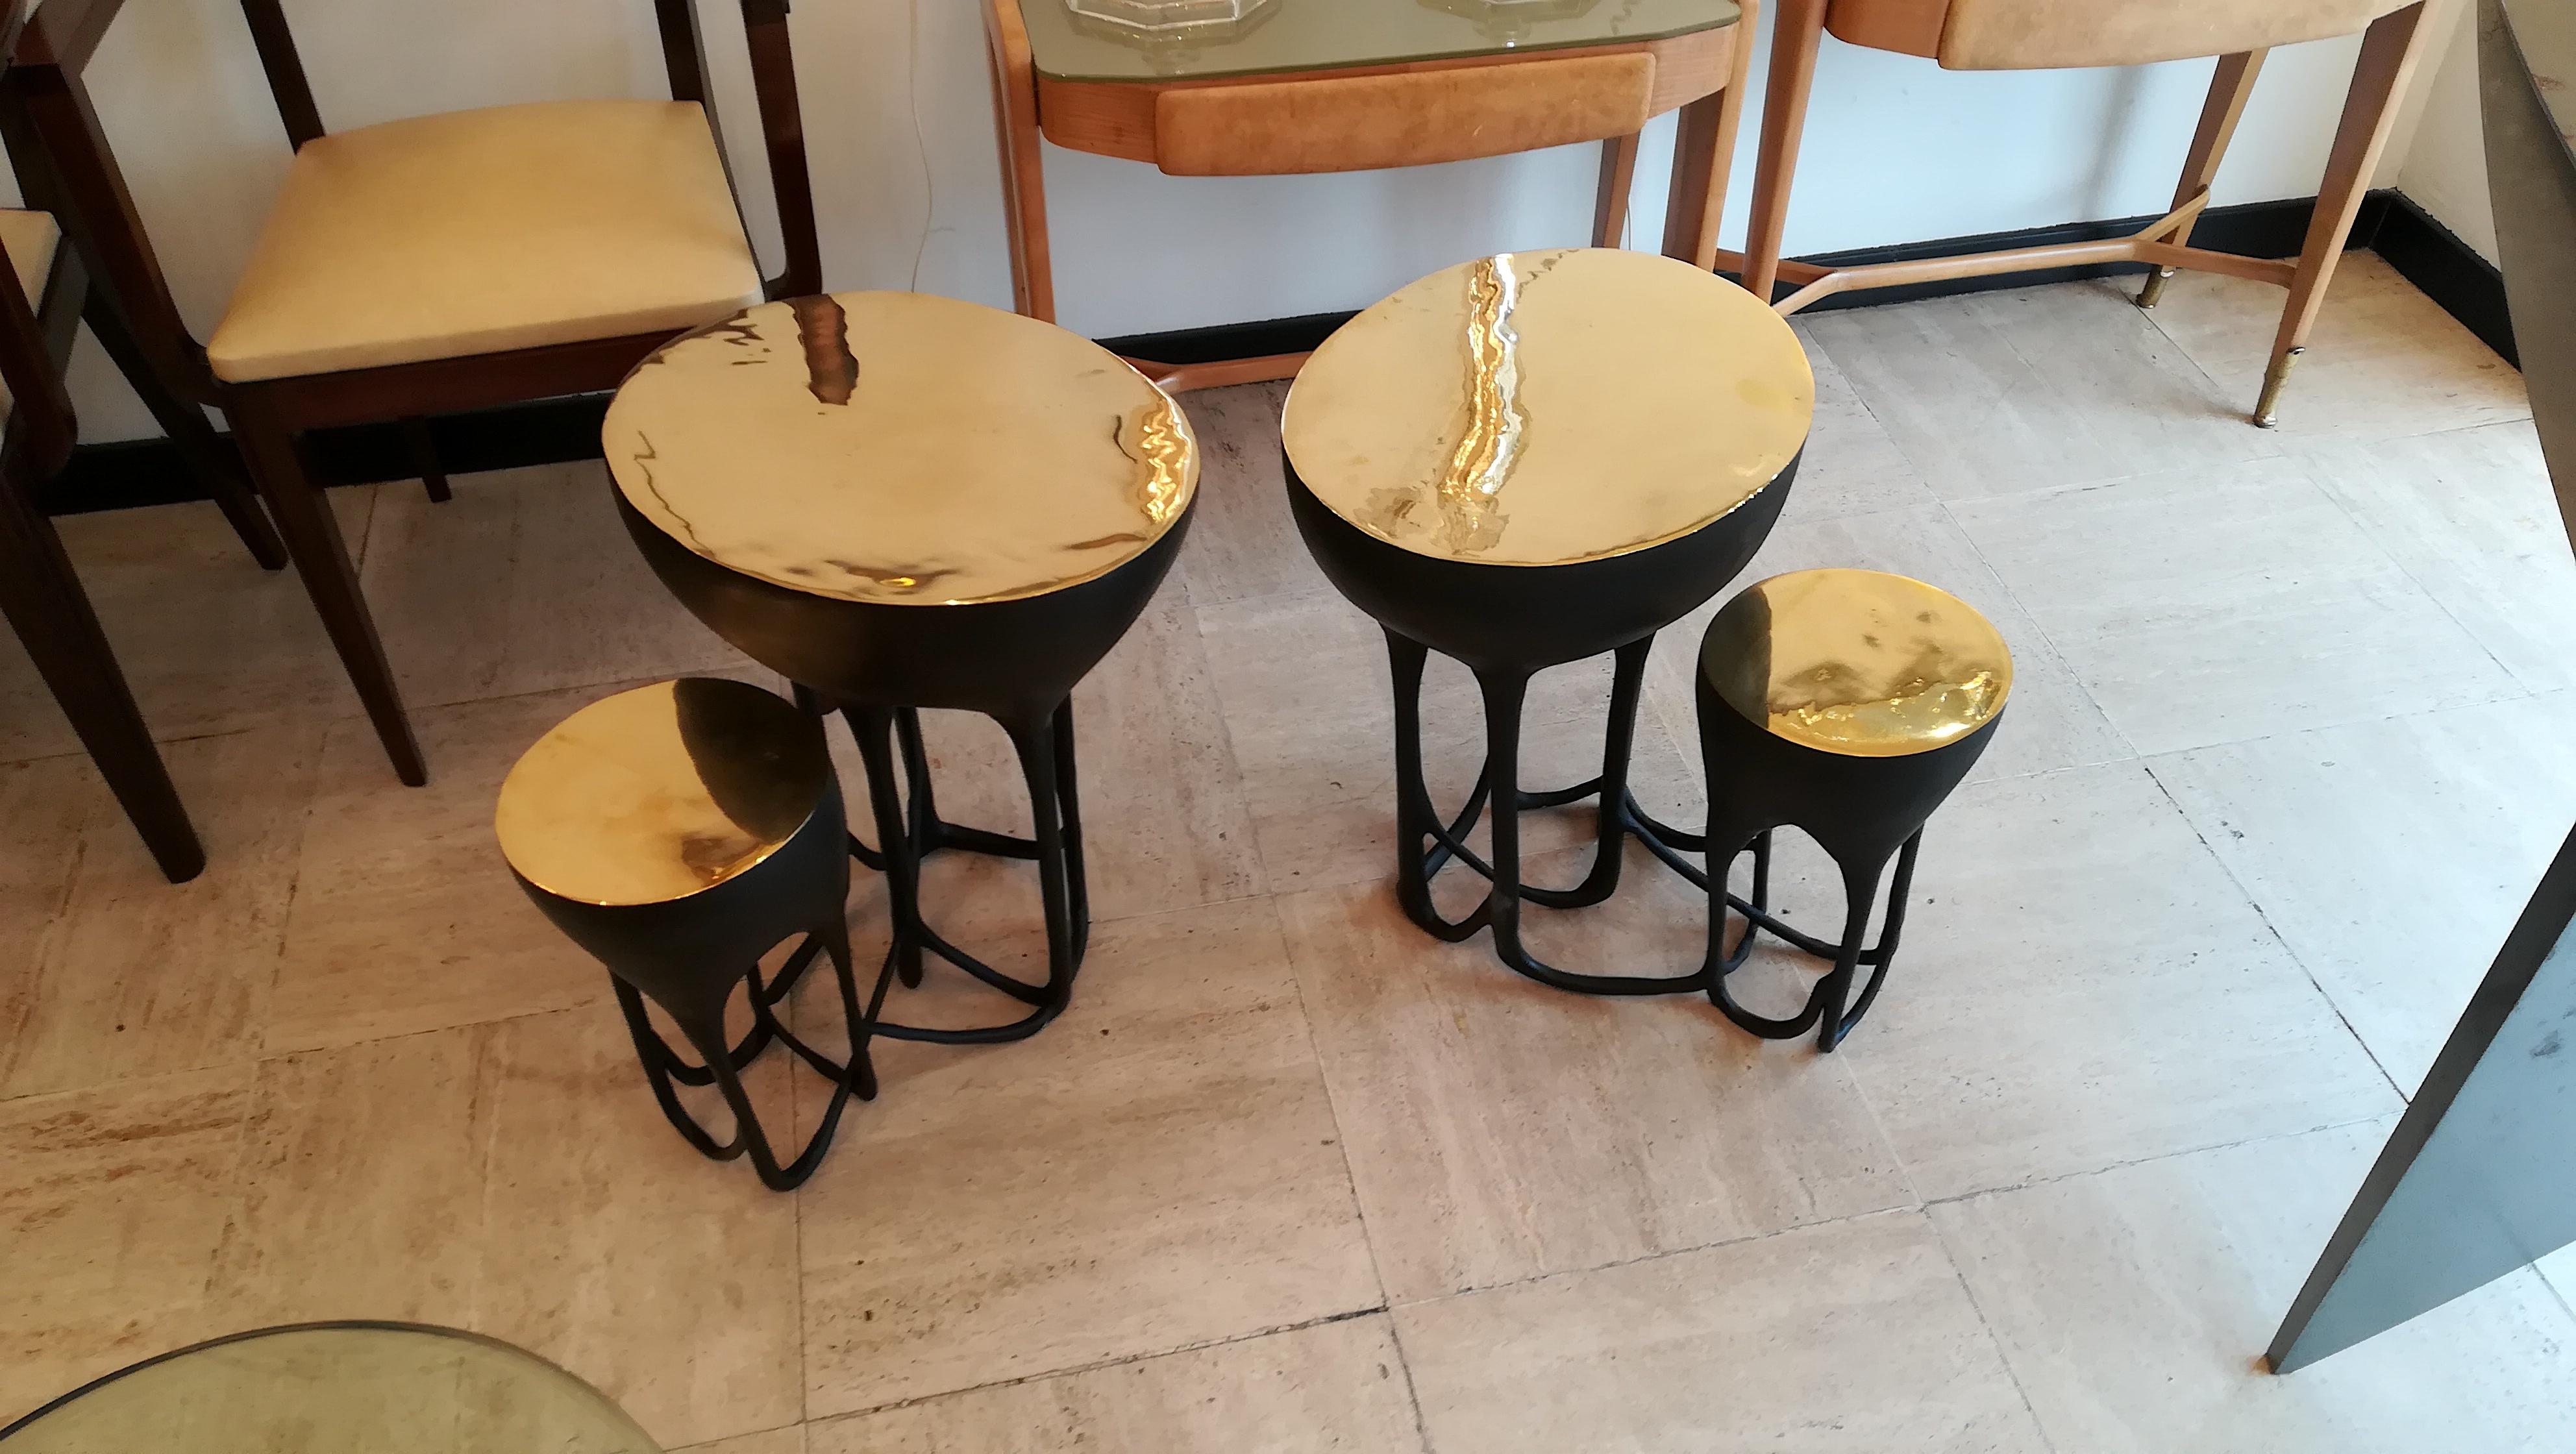 Pair of double top bronze side tables, black patina except the top natural bronze.
Can be sold separately on request.